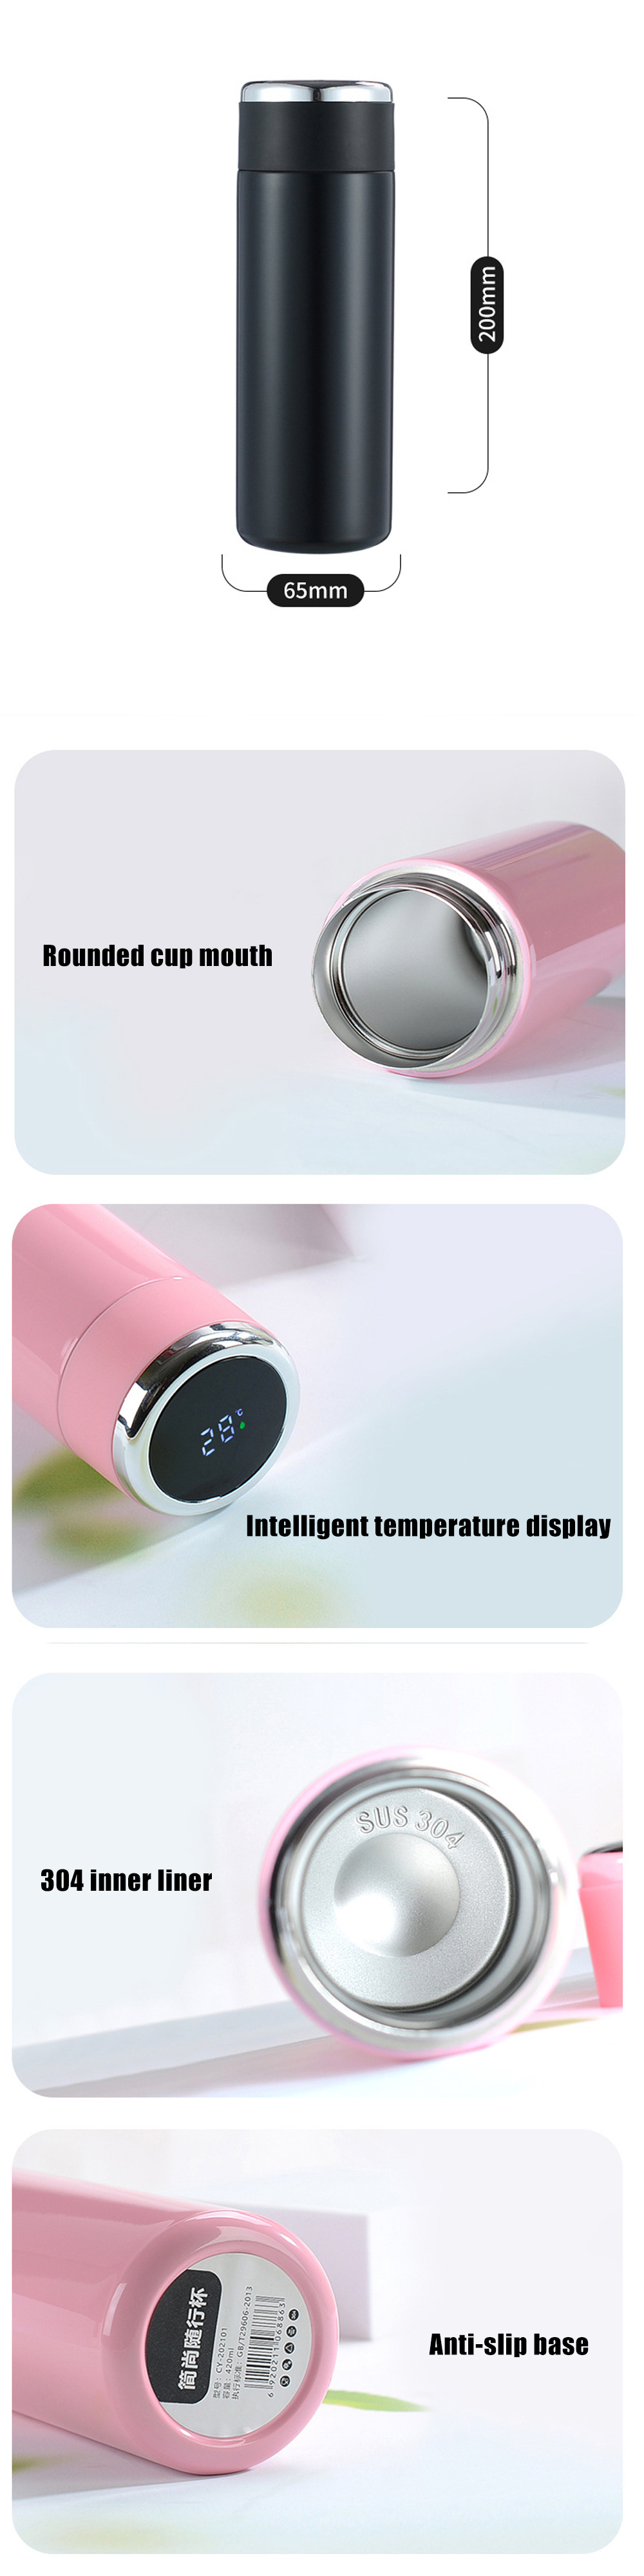 IPReereg-400ML-Intelligent-Insulation-Cup-Temperature-Display-Stainless-Steel-Water-Cup-Portable-Min-1908587-3